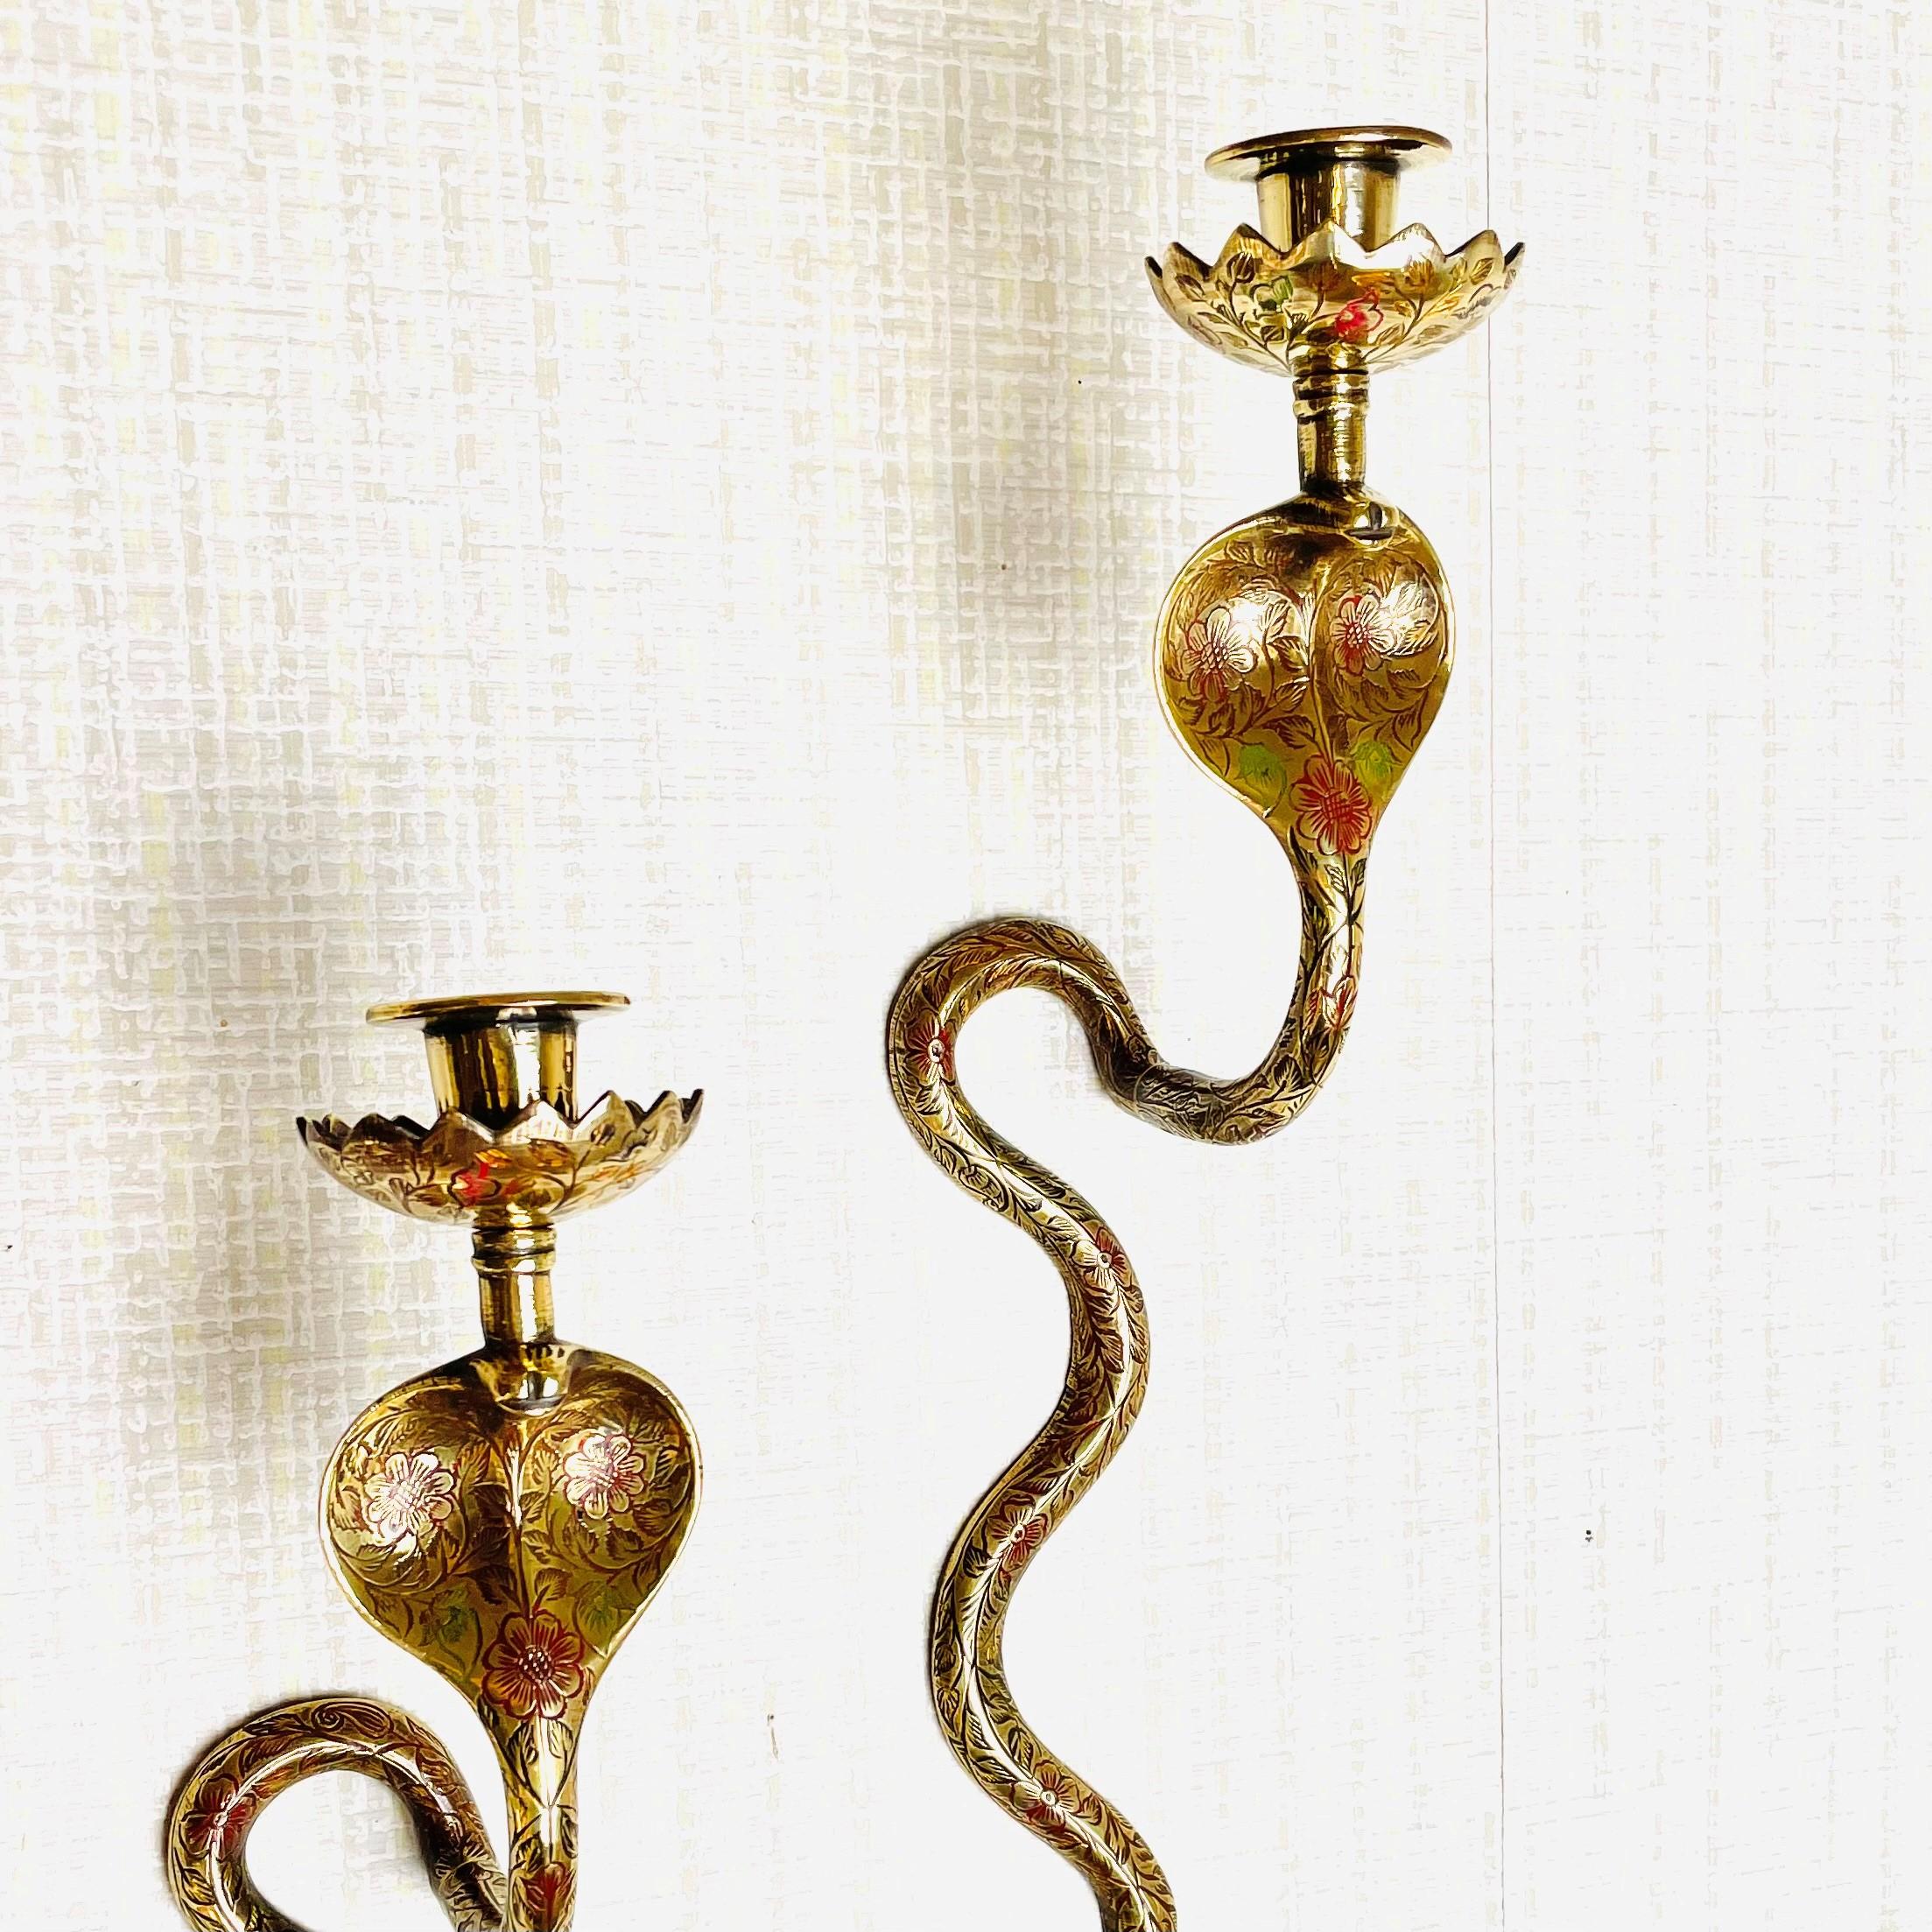 Asian Pair of Wall Lights  in the Shape of a Cobra, Art Deco, 1920s-1930s